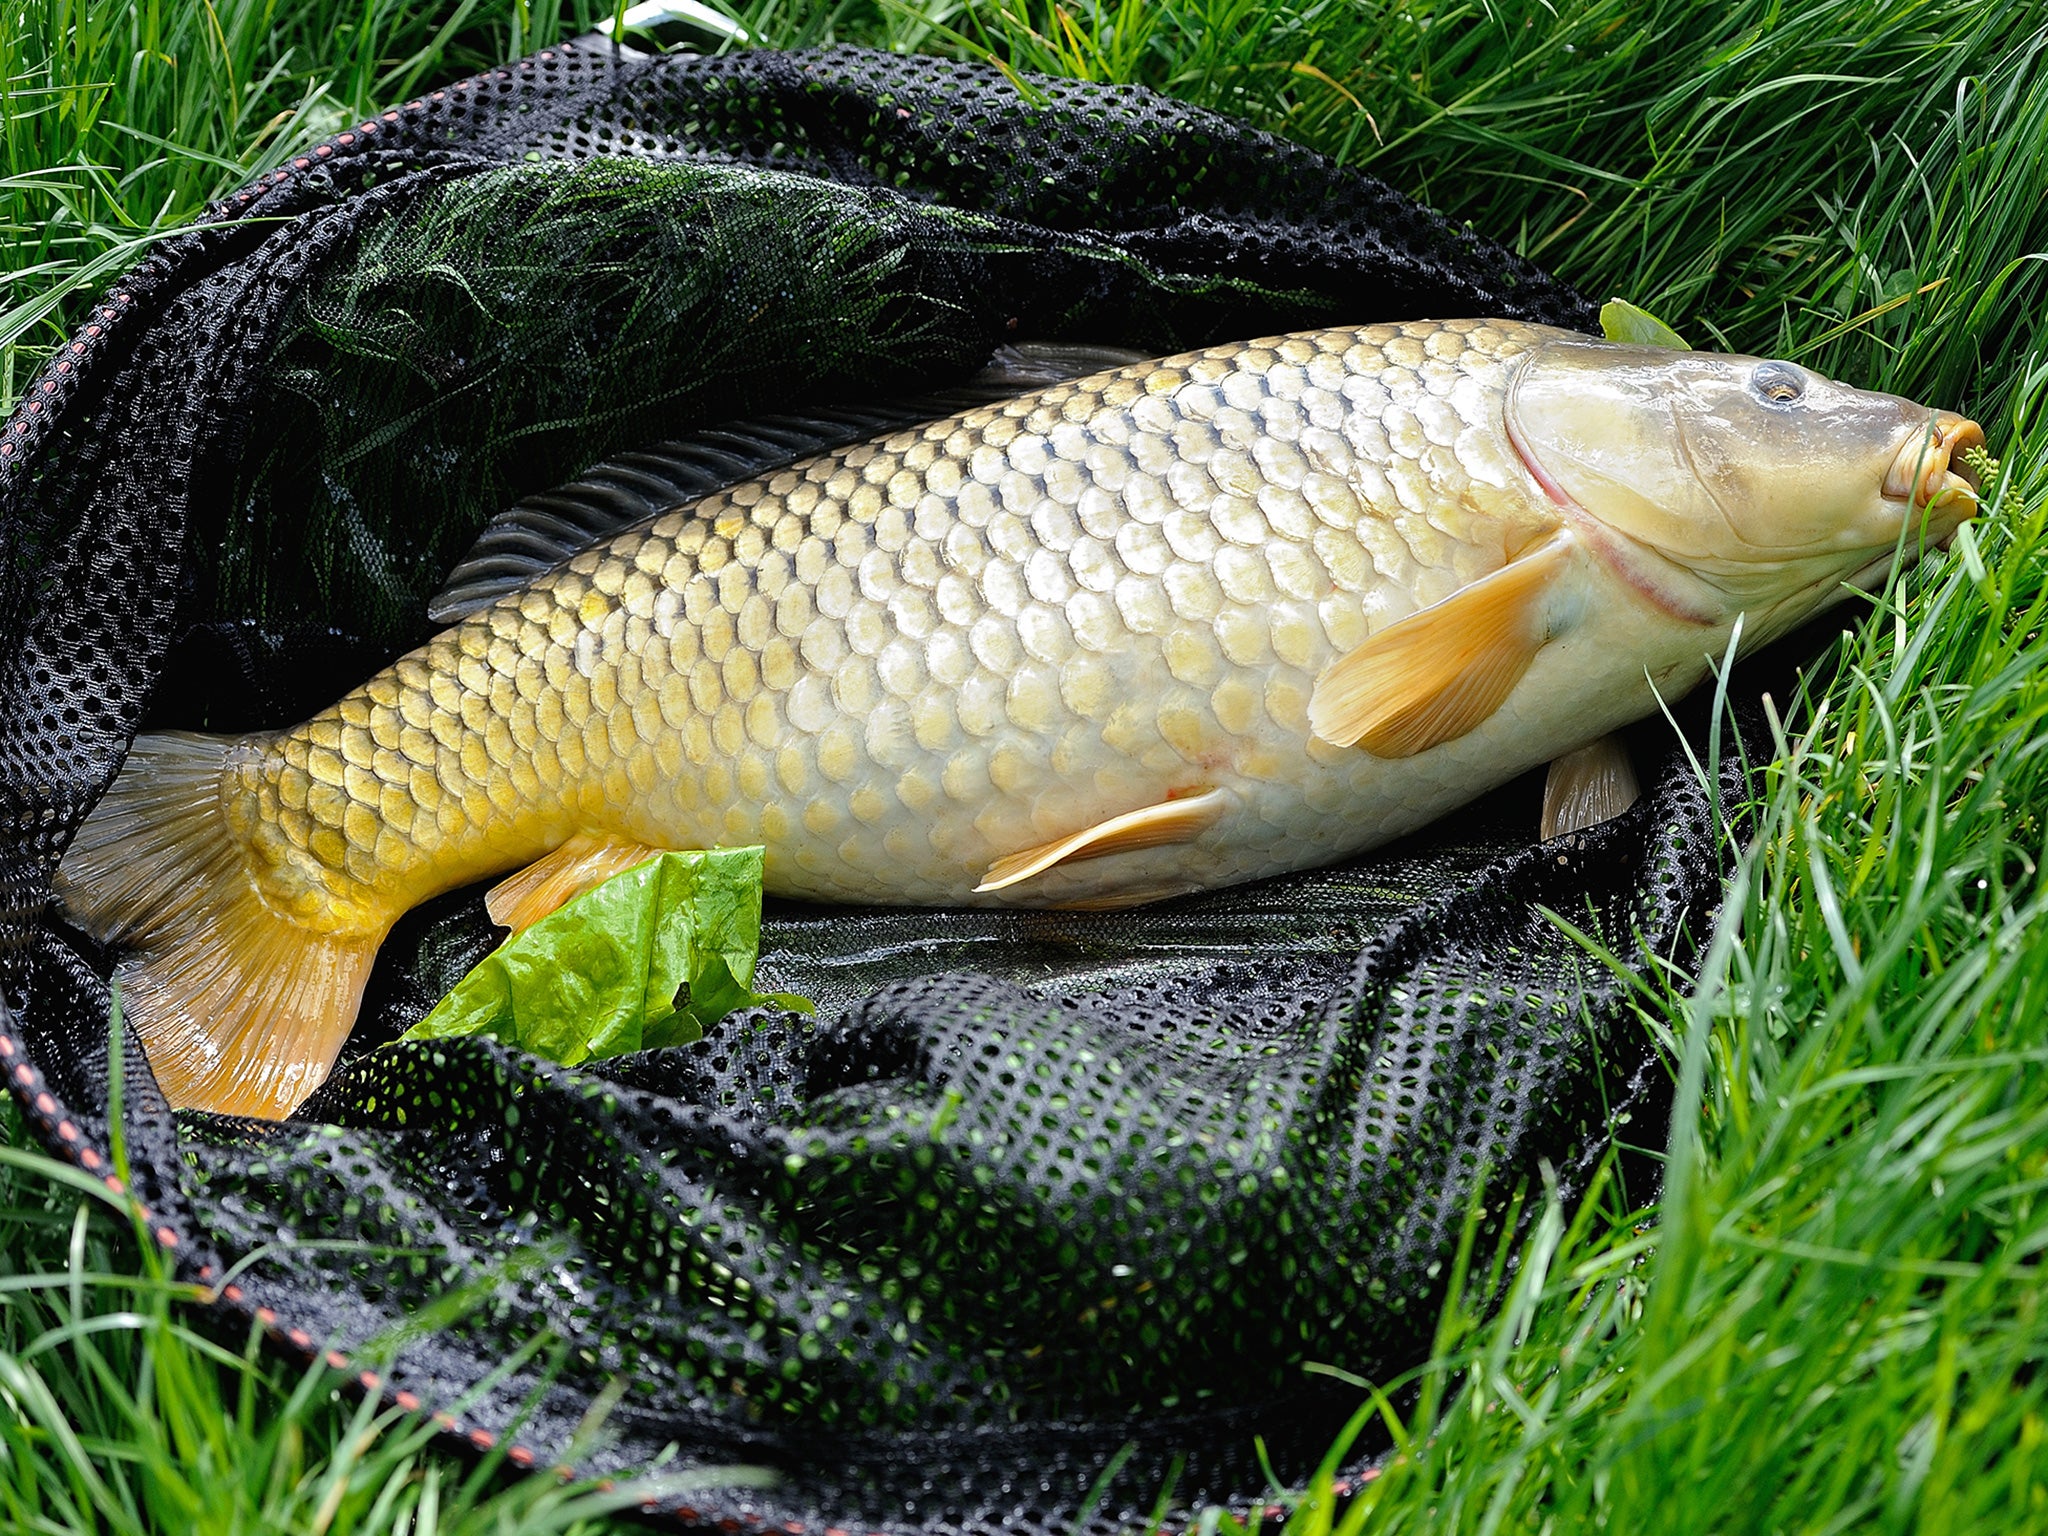 Carp can grow up to around 18kg in the UK